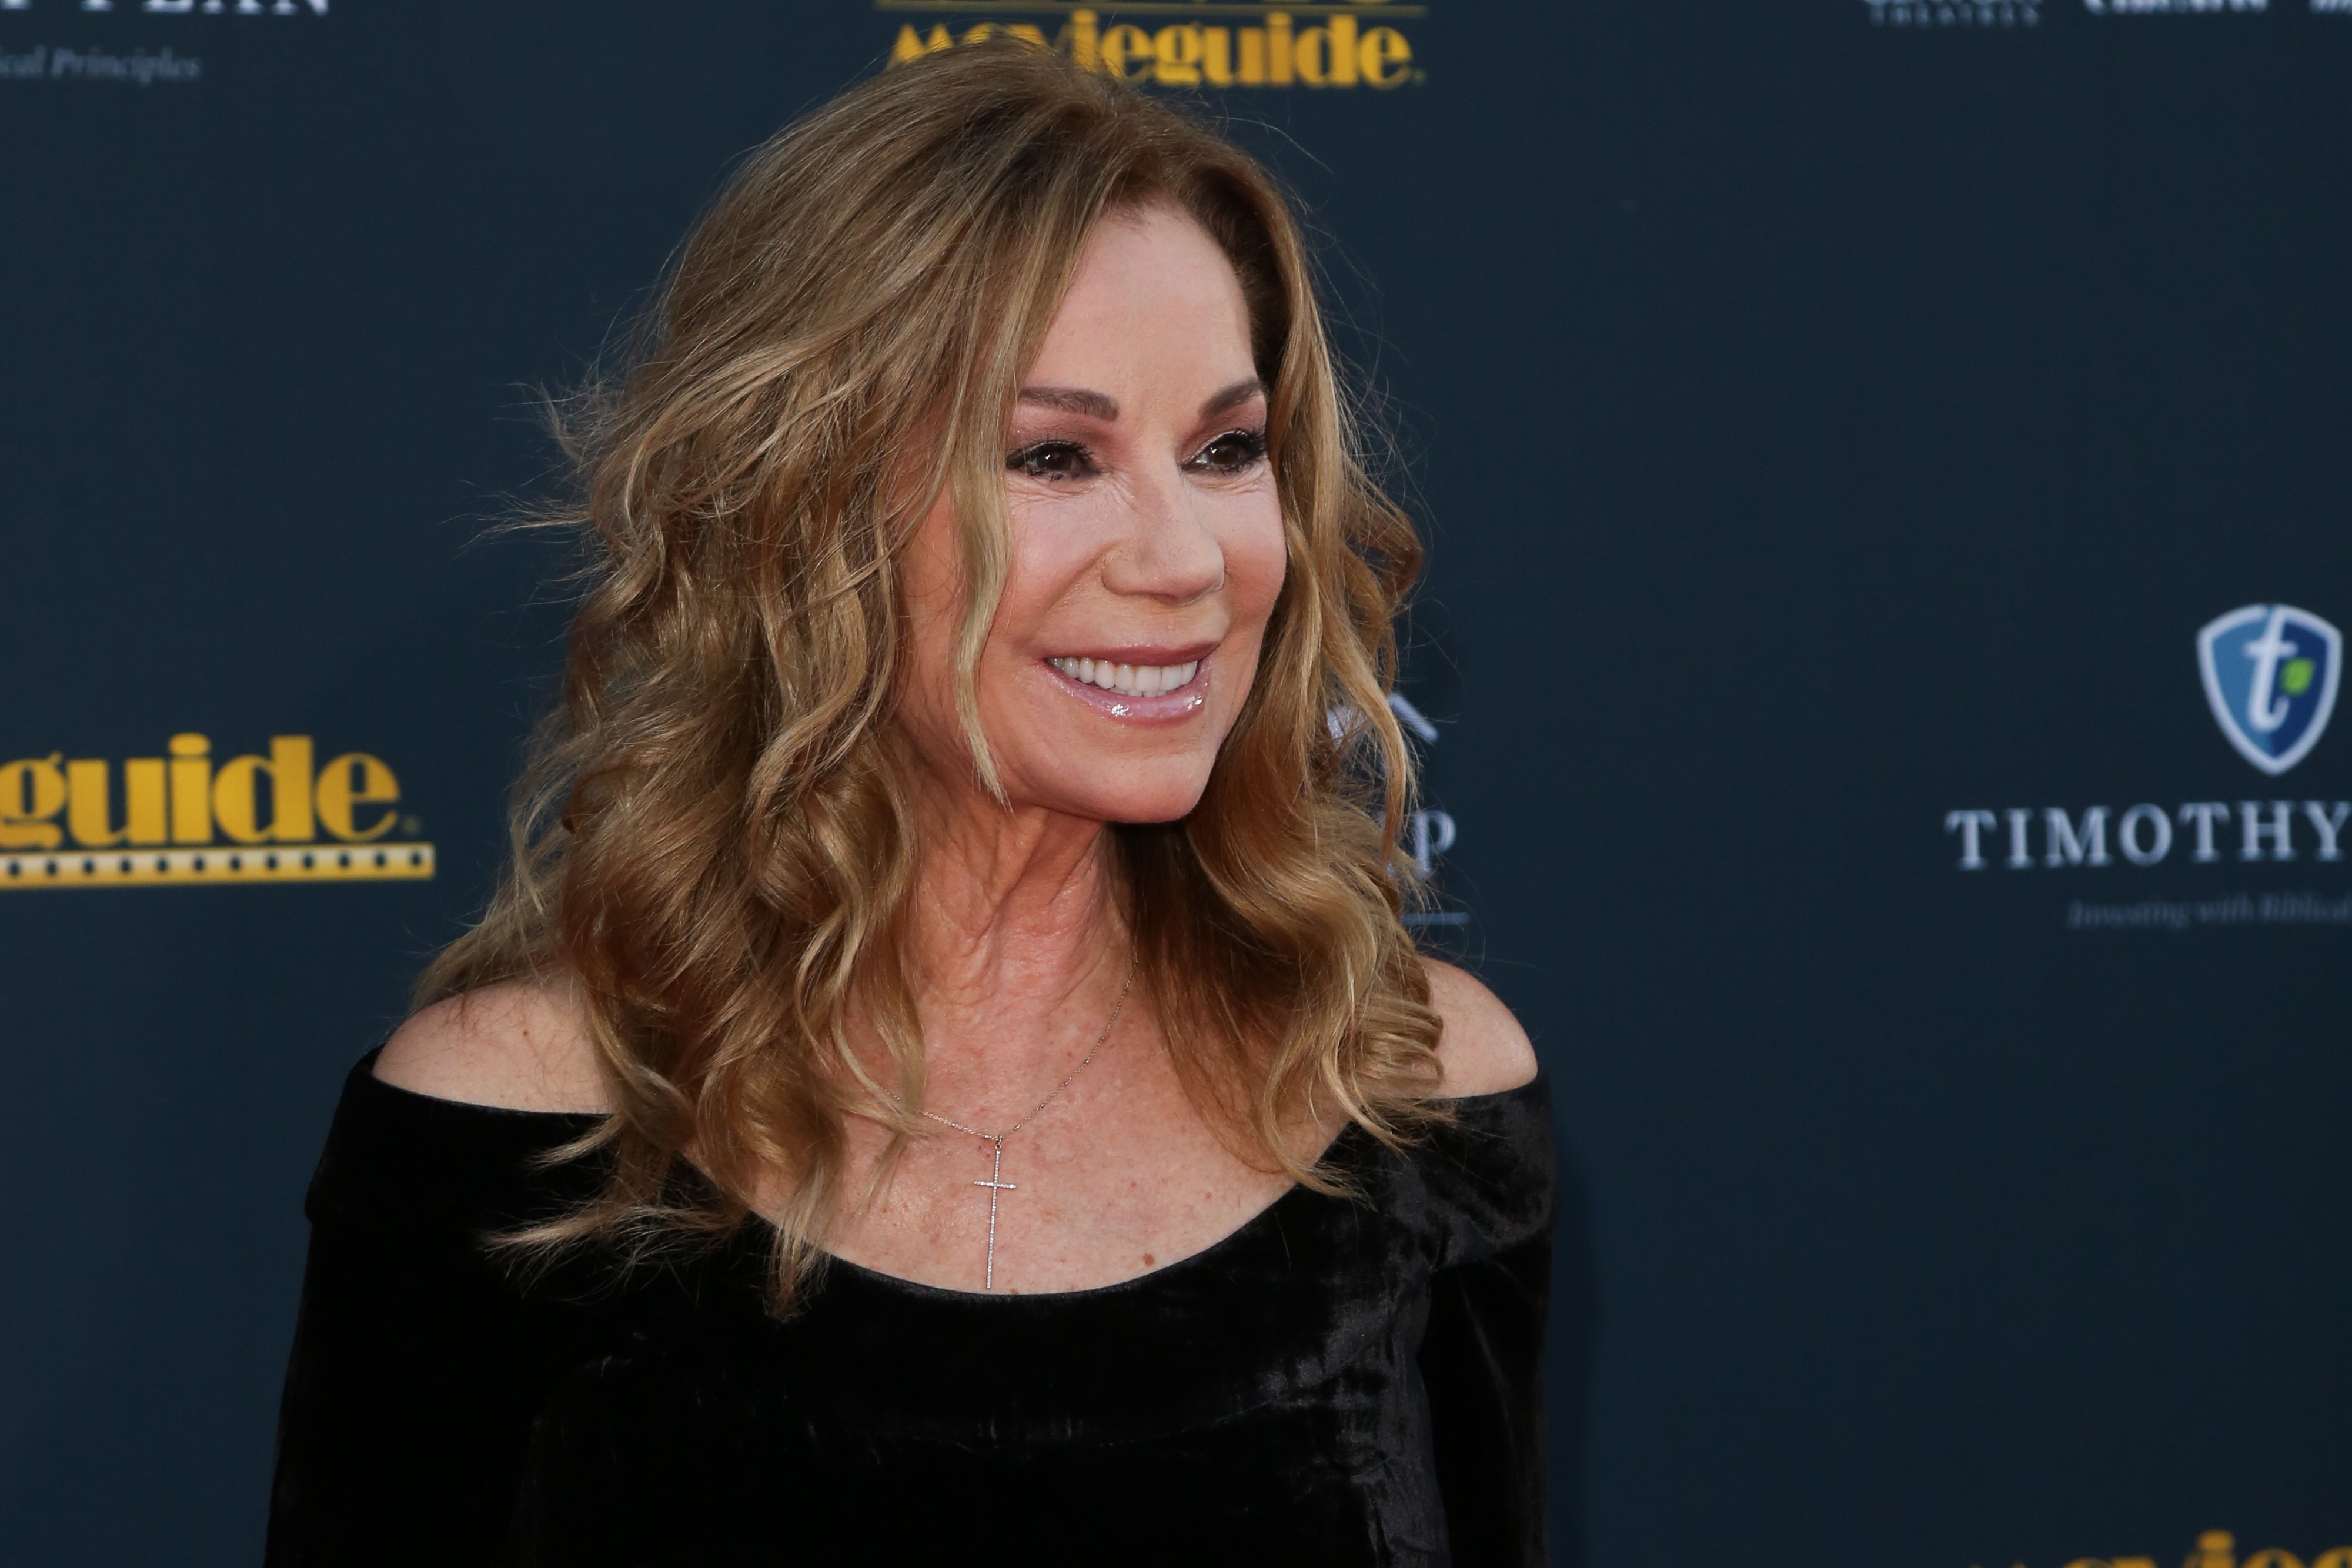 Kathie Lee Gifford at the 28th Annual Movie guide Awards Gala at Avalon Theater, 2020, Los Angeles, California. | Photo: Getty Images